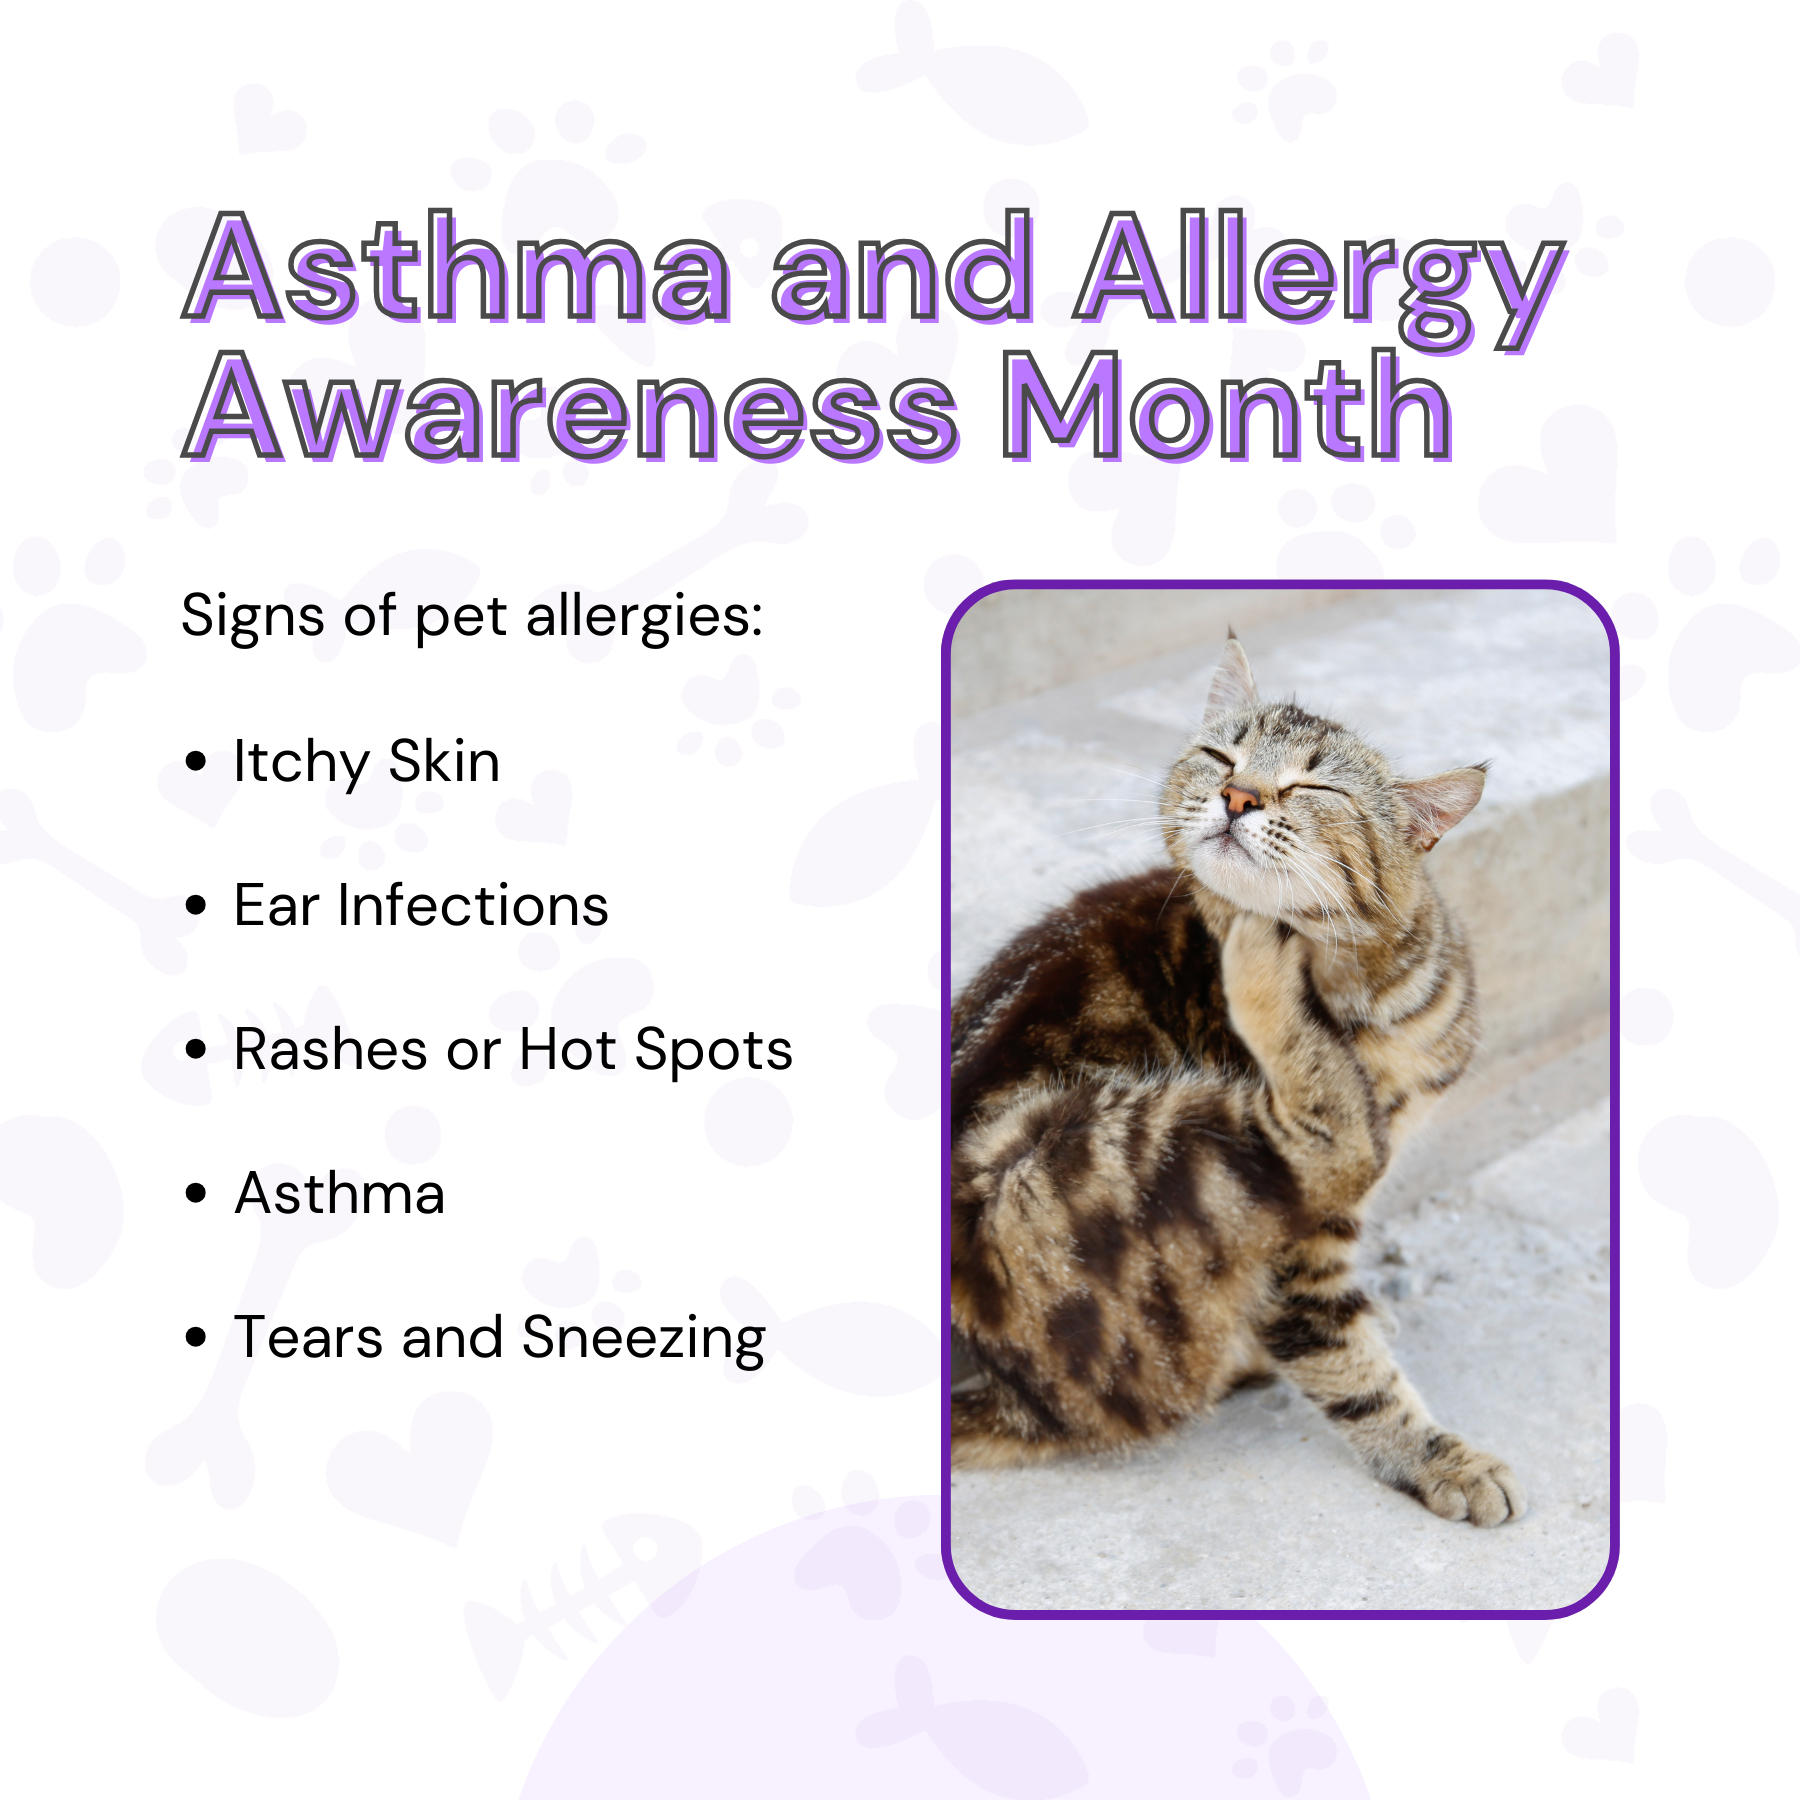 Asthma and Allergy Awareness Month